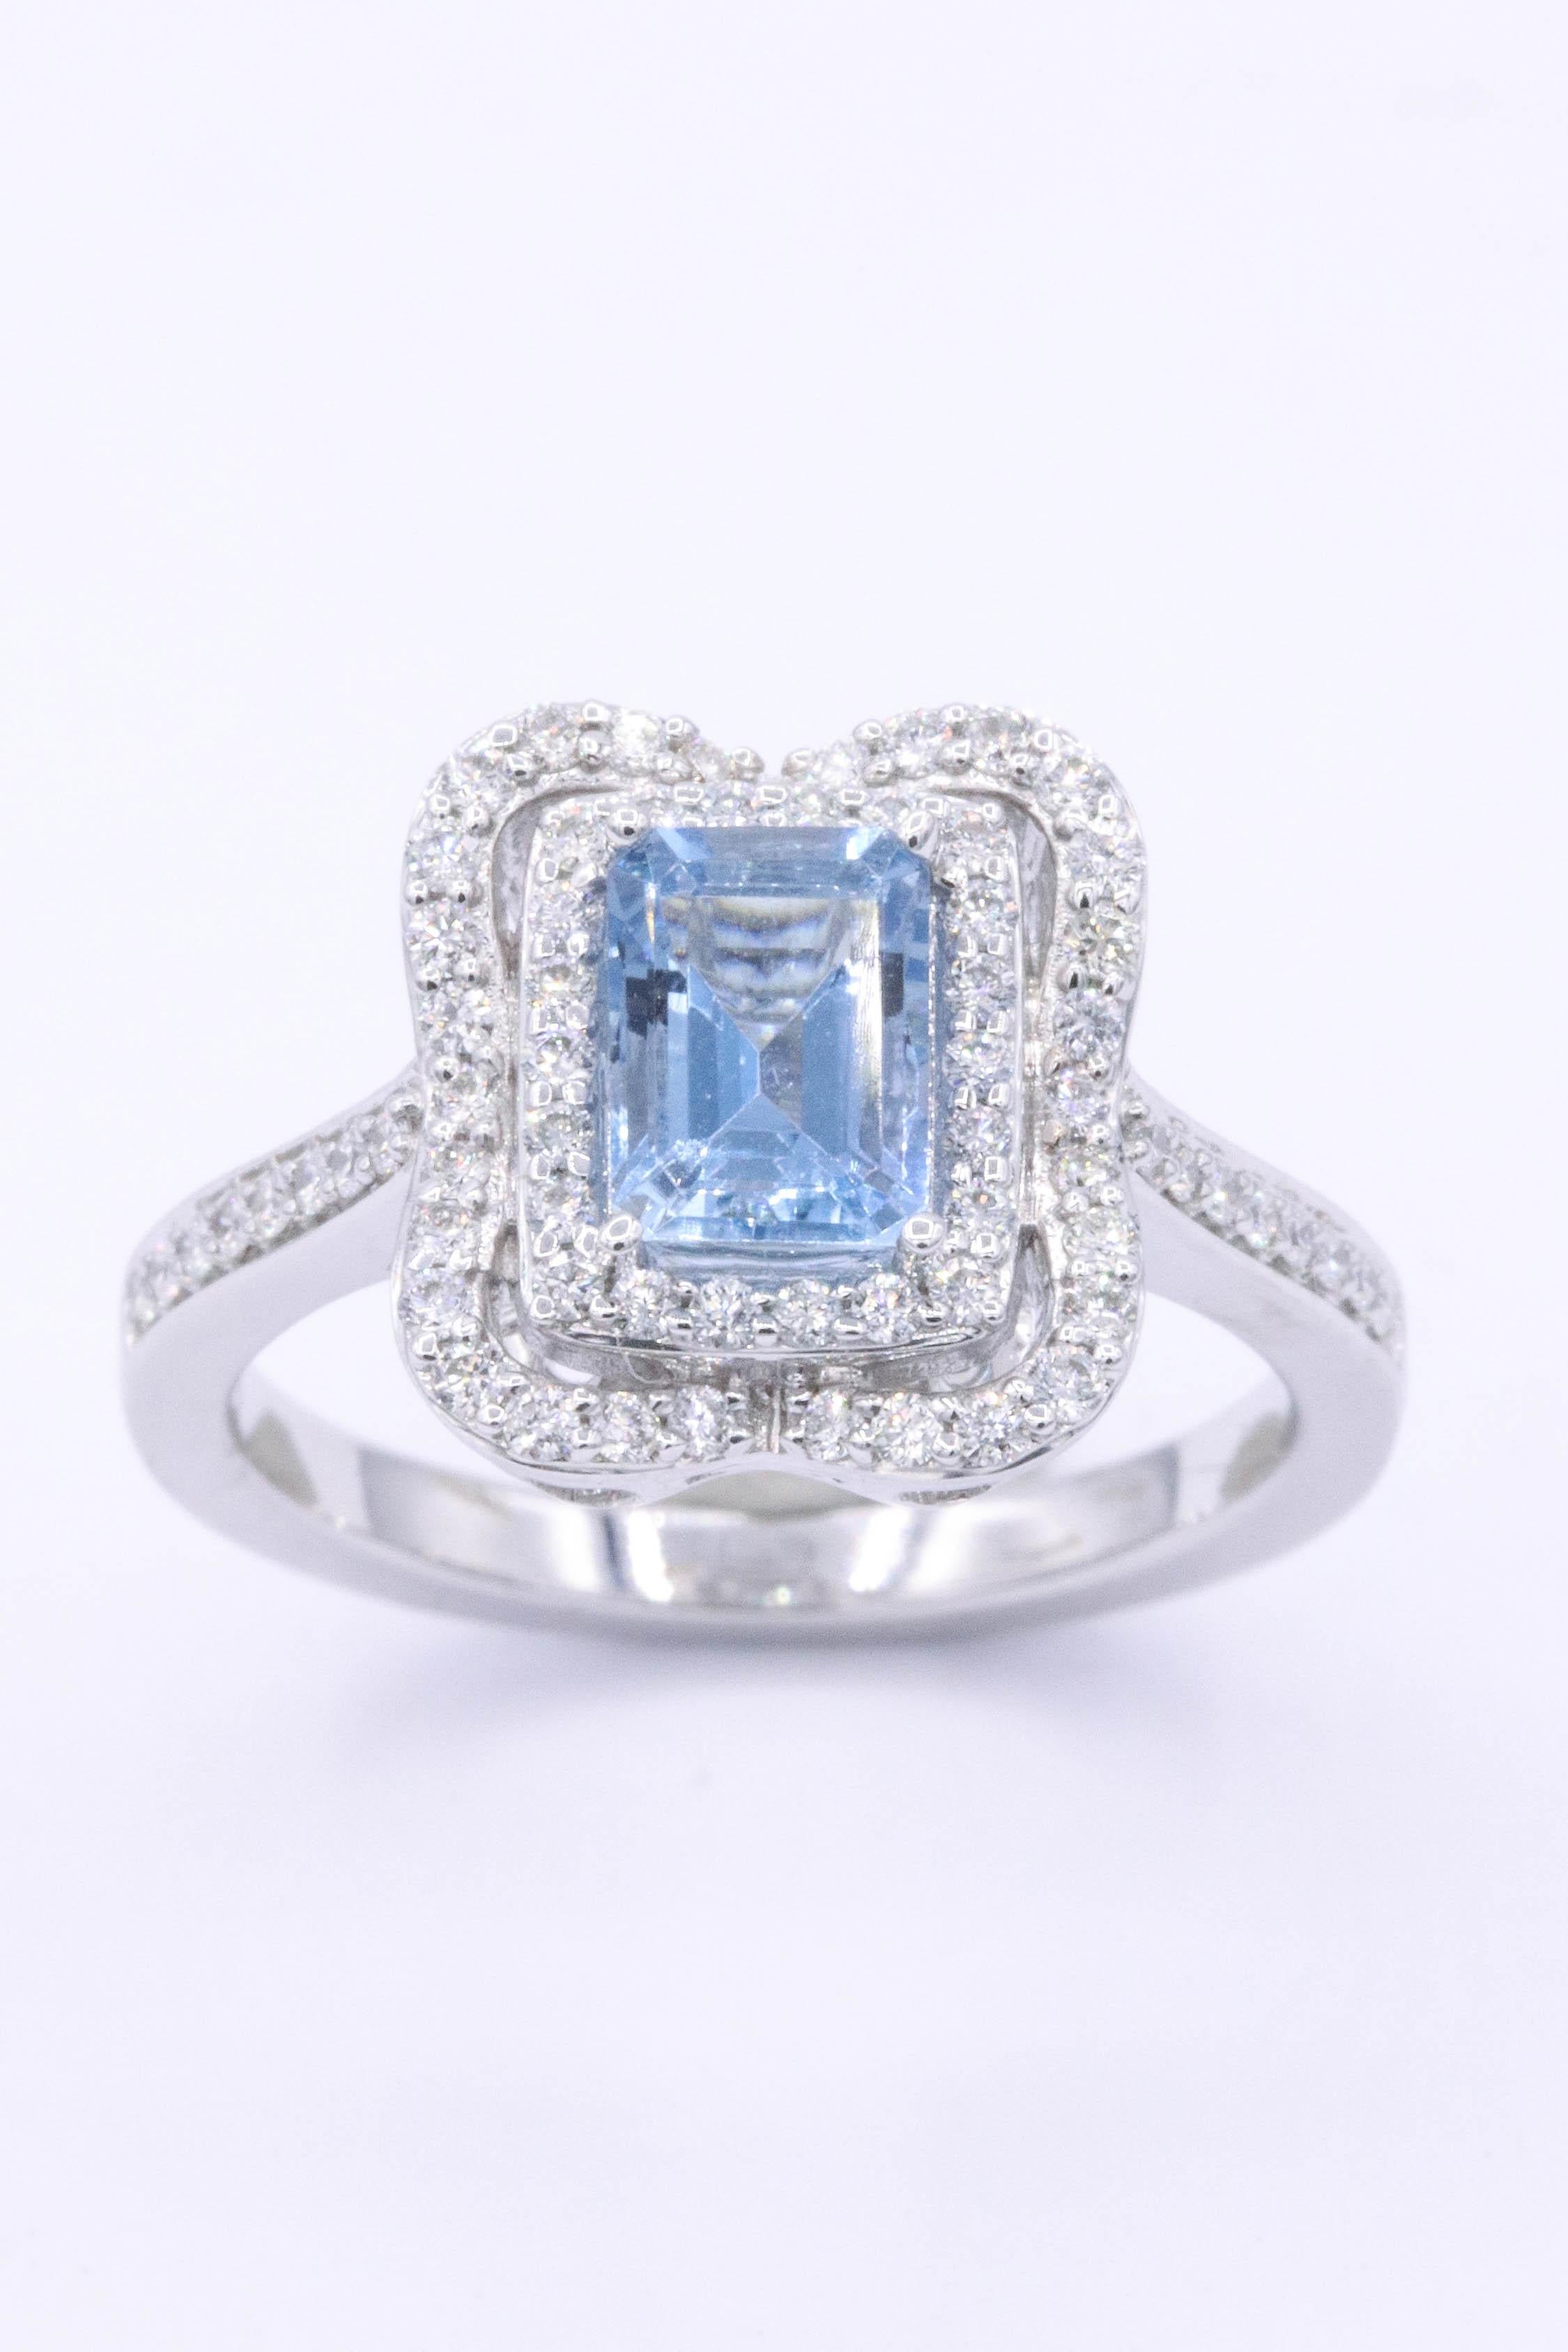 14K white gold
the center stone is a beautiful emerald cut Aquamarine 0.92 cts and the diamonds weight 0.43 cts.
Aquamarine measures 7 x 5 mm
The top of the ring measures 1.2 cm x 1cm
The ring will be sized to your finger size